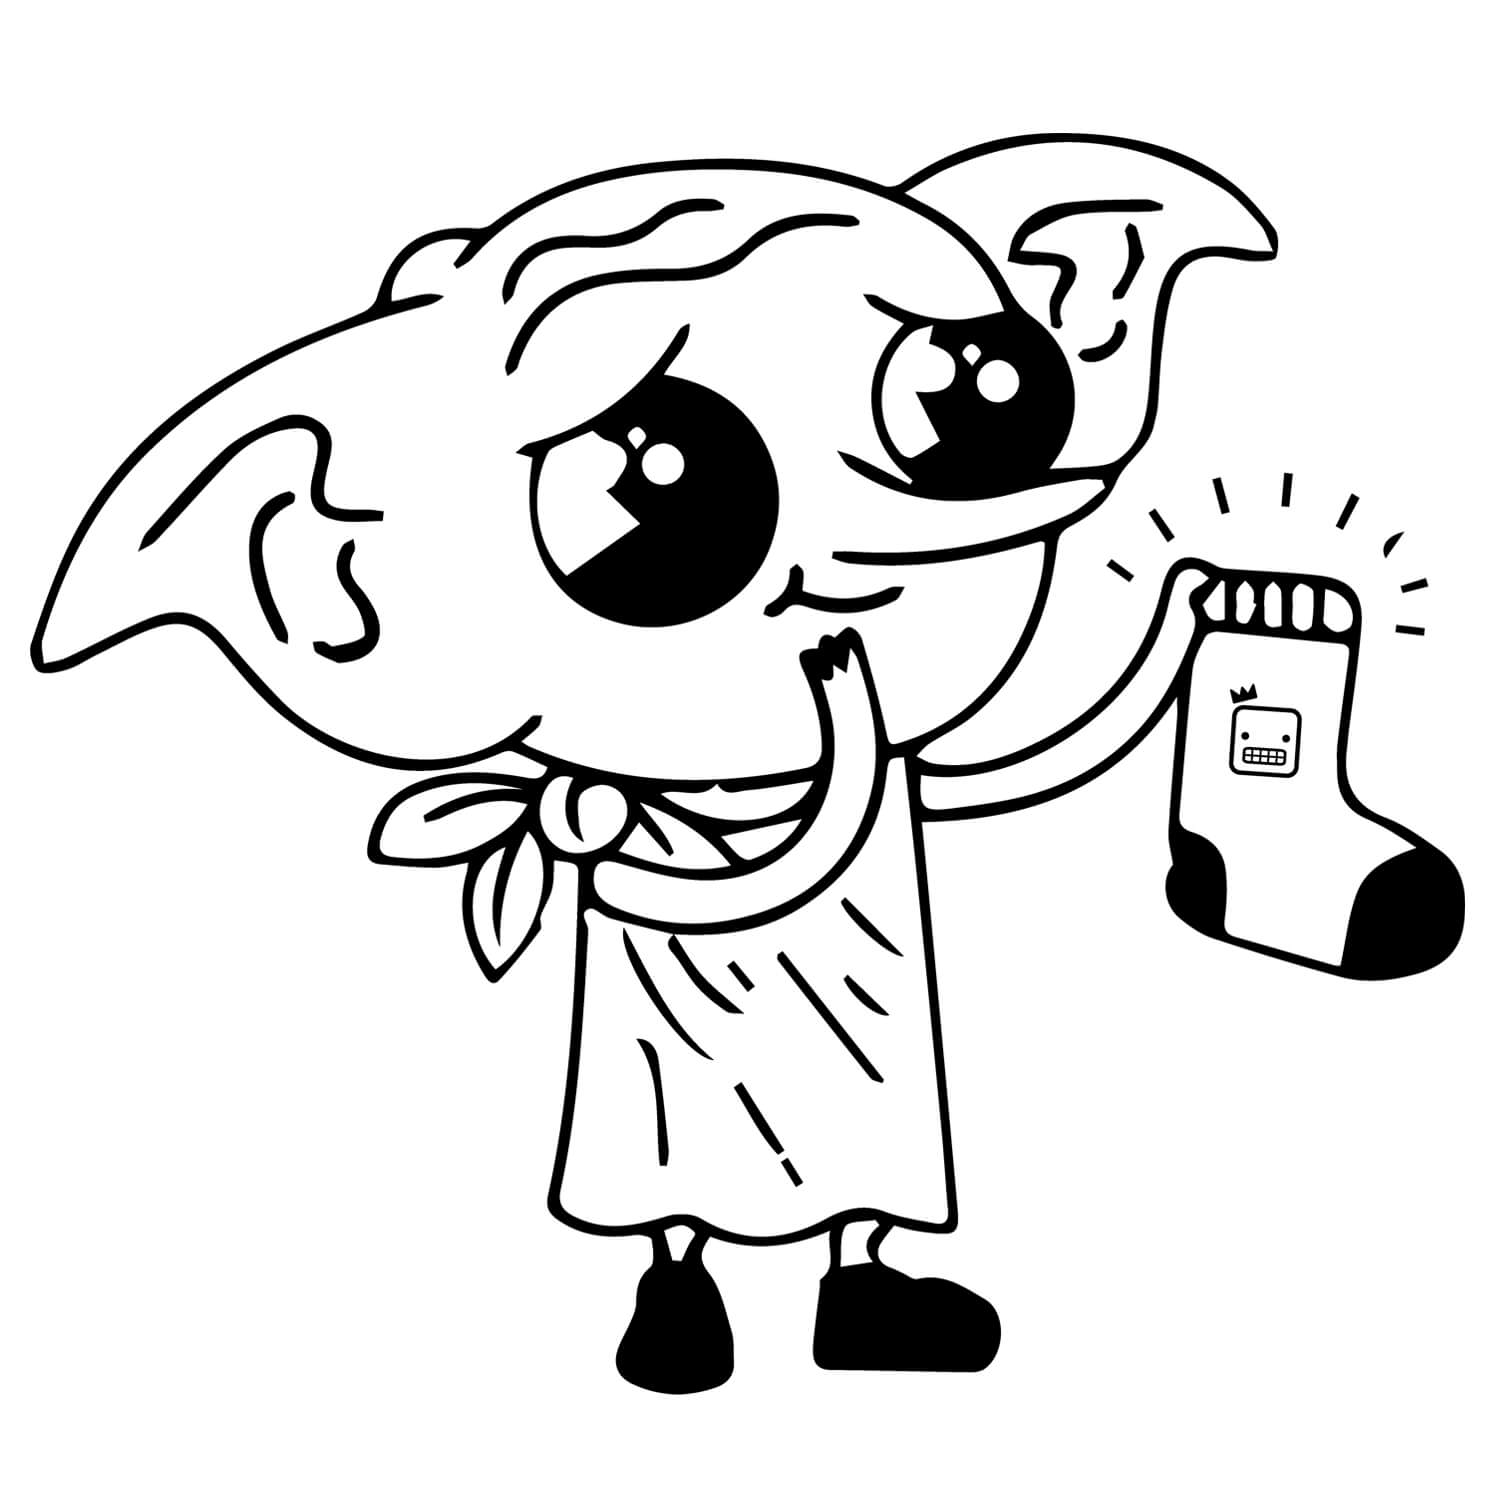 dobby-coloring-p-coloring-pages